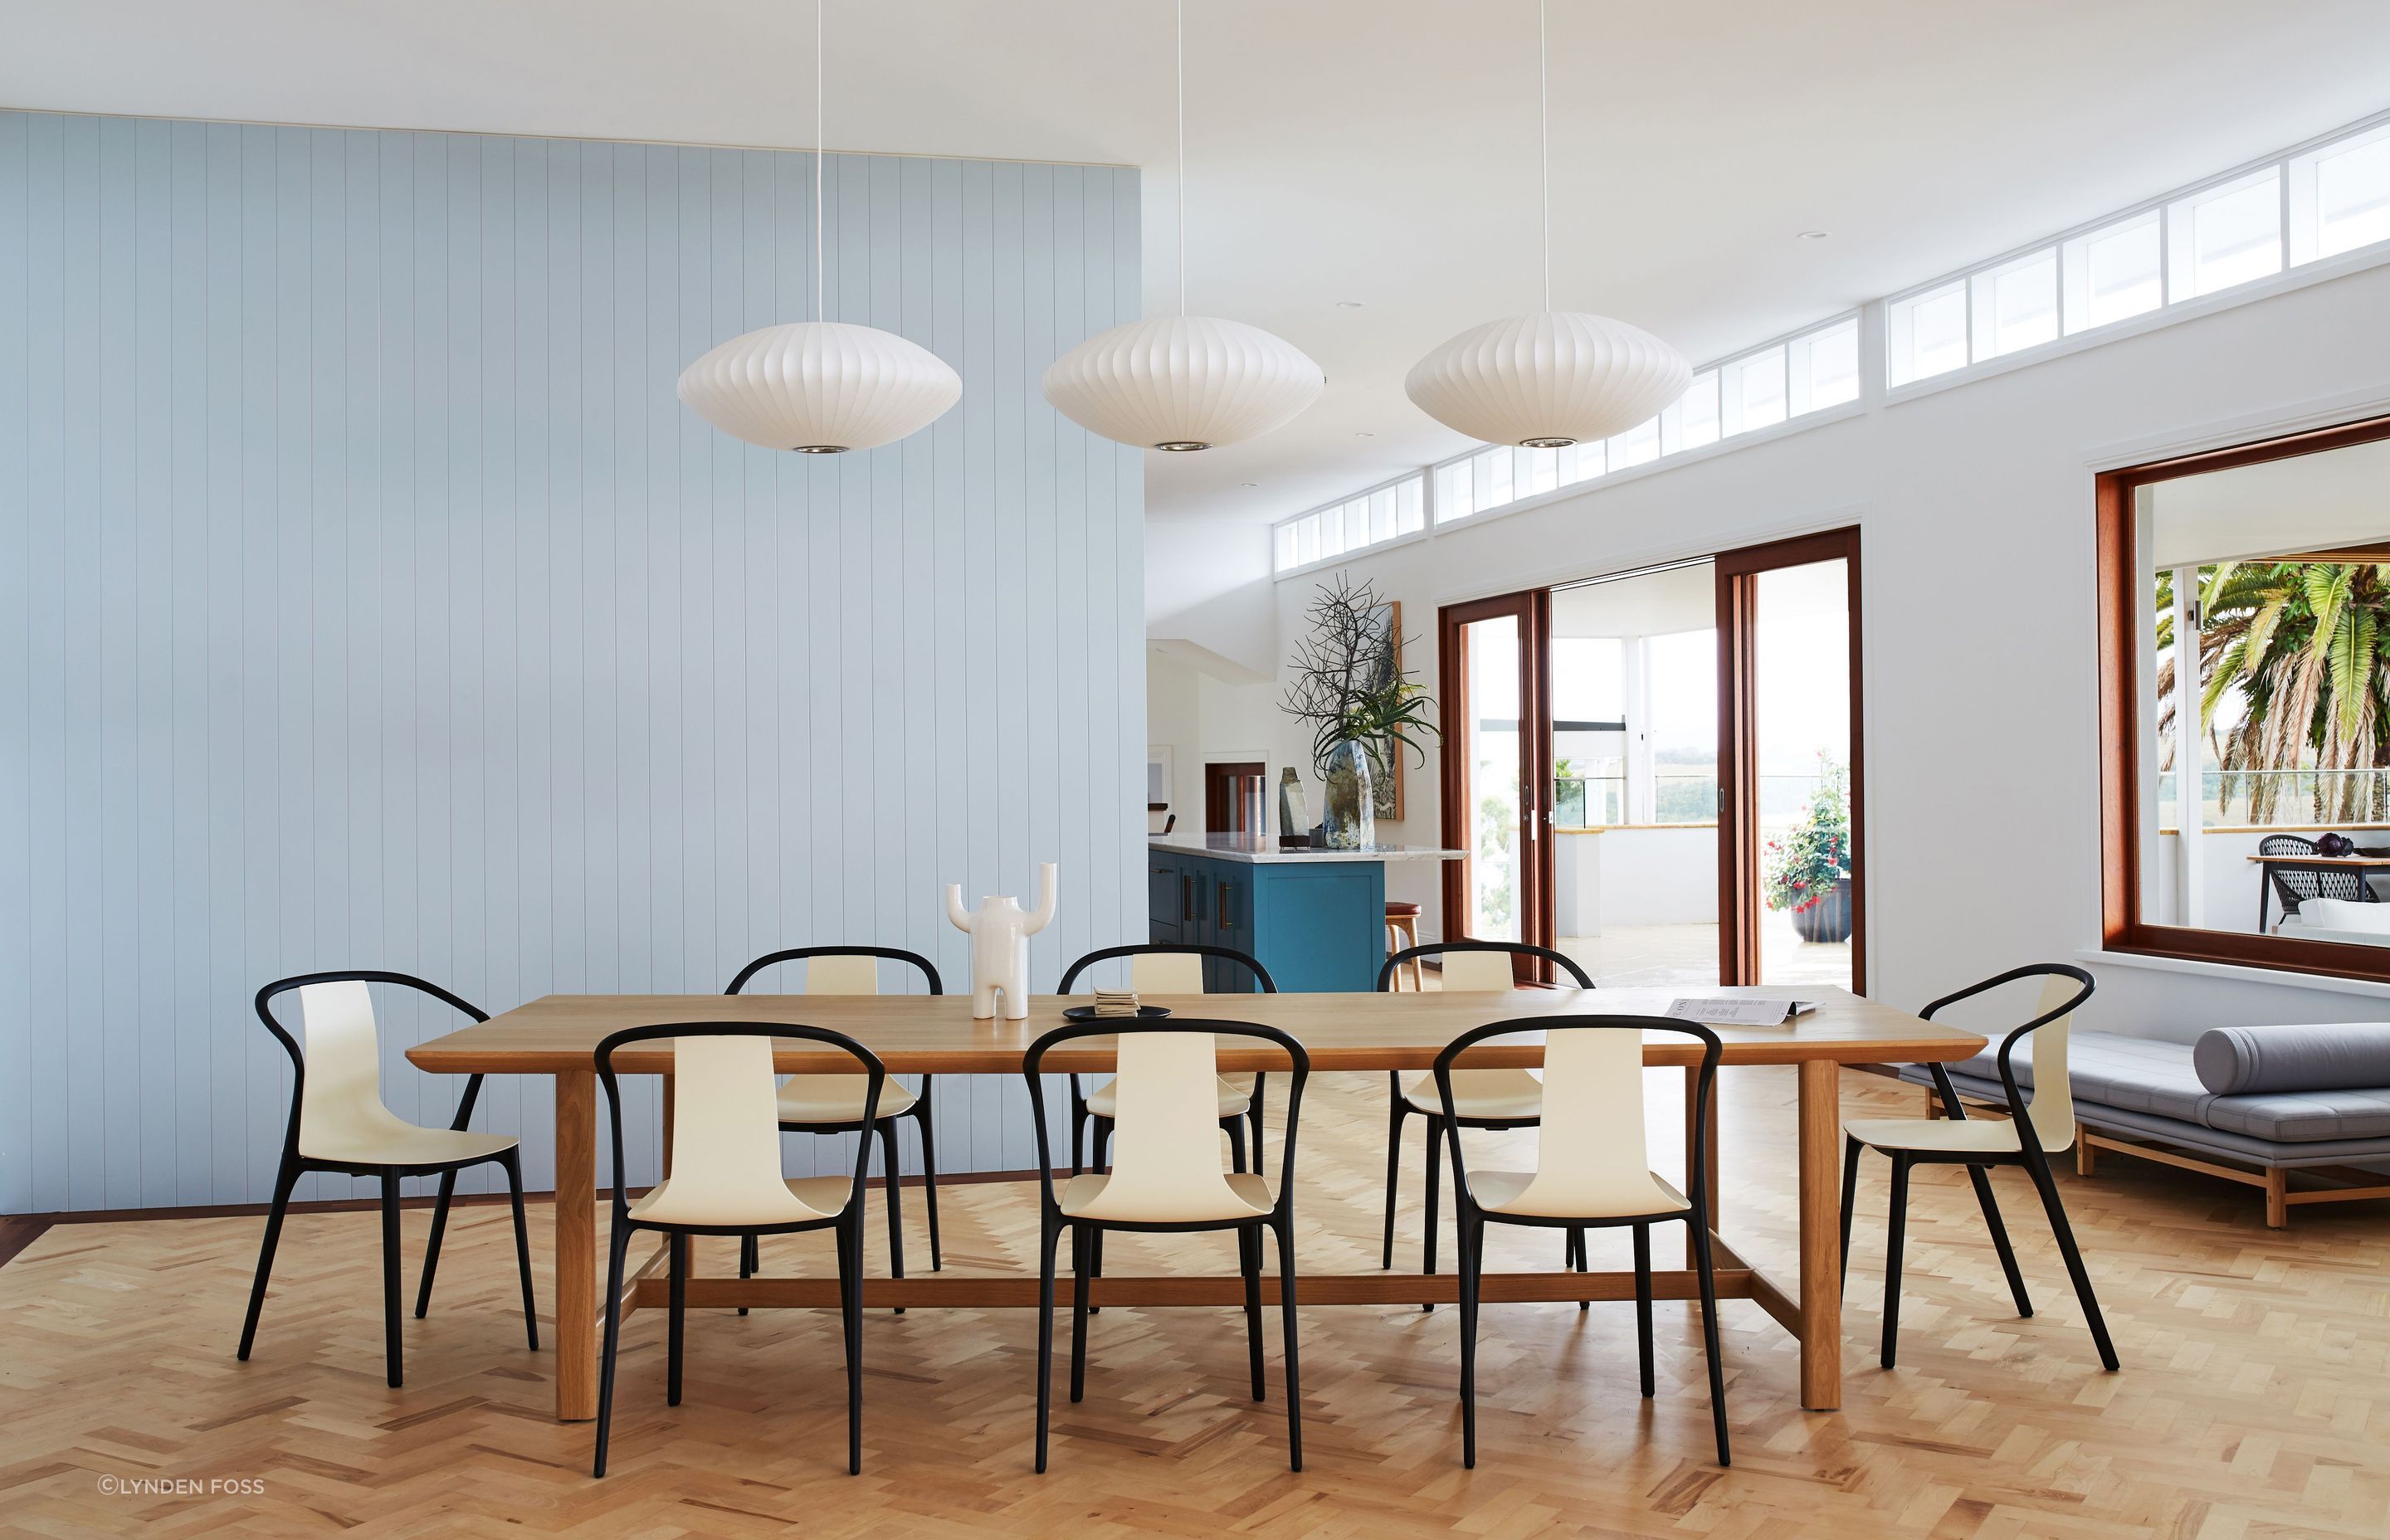 Three simple pendants highlight the dining table.